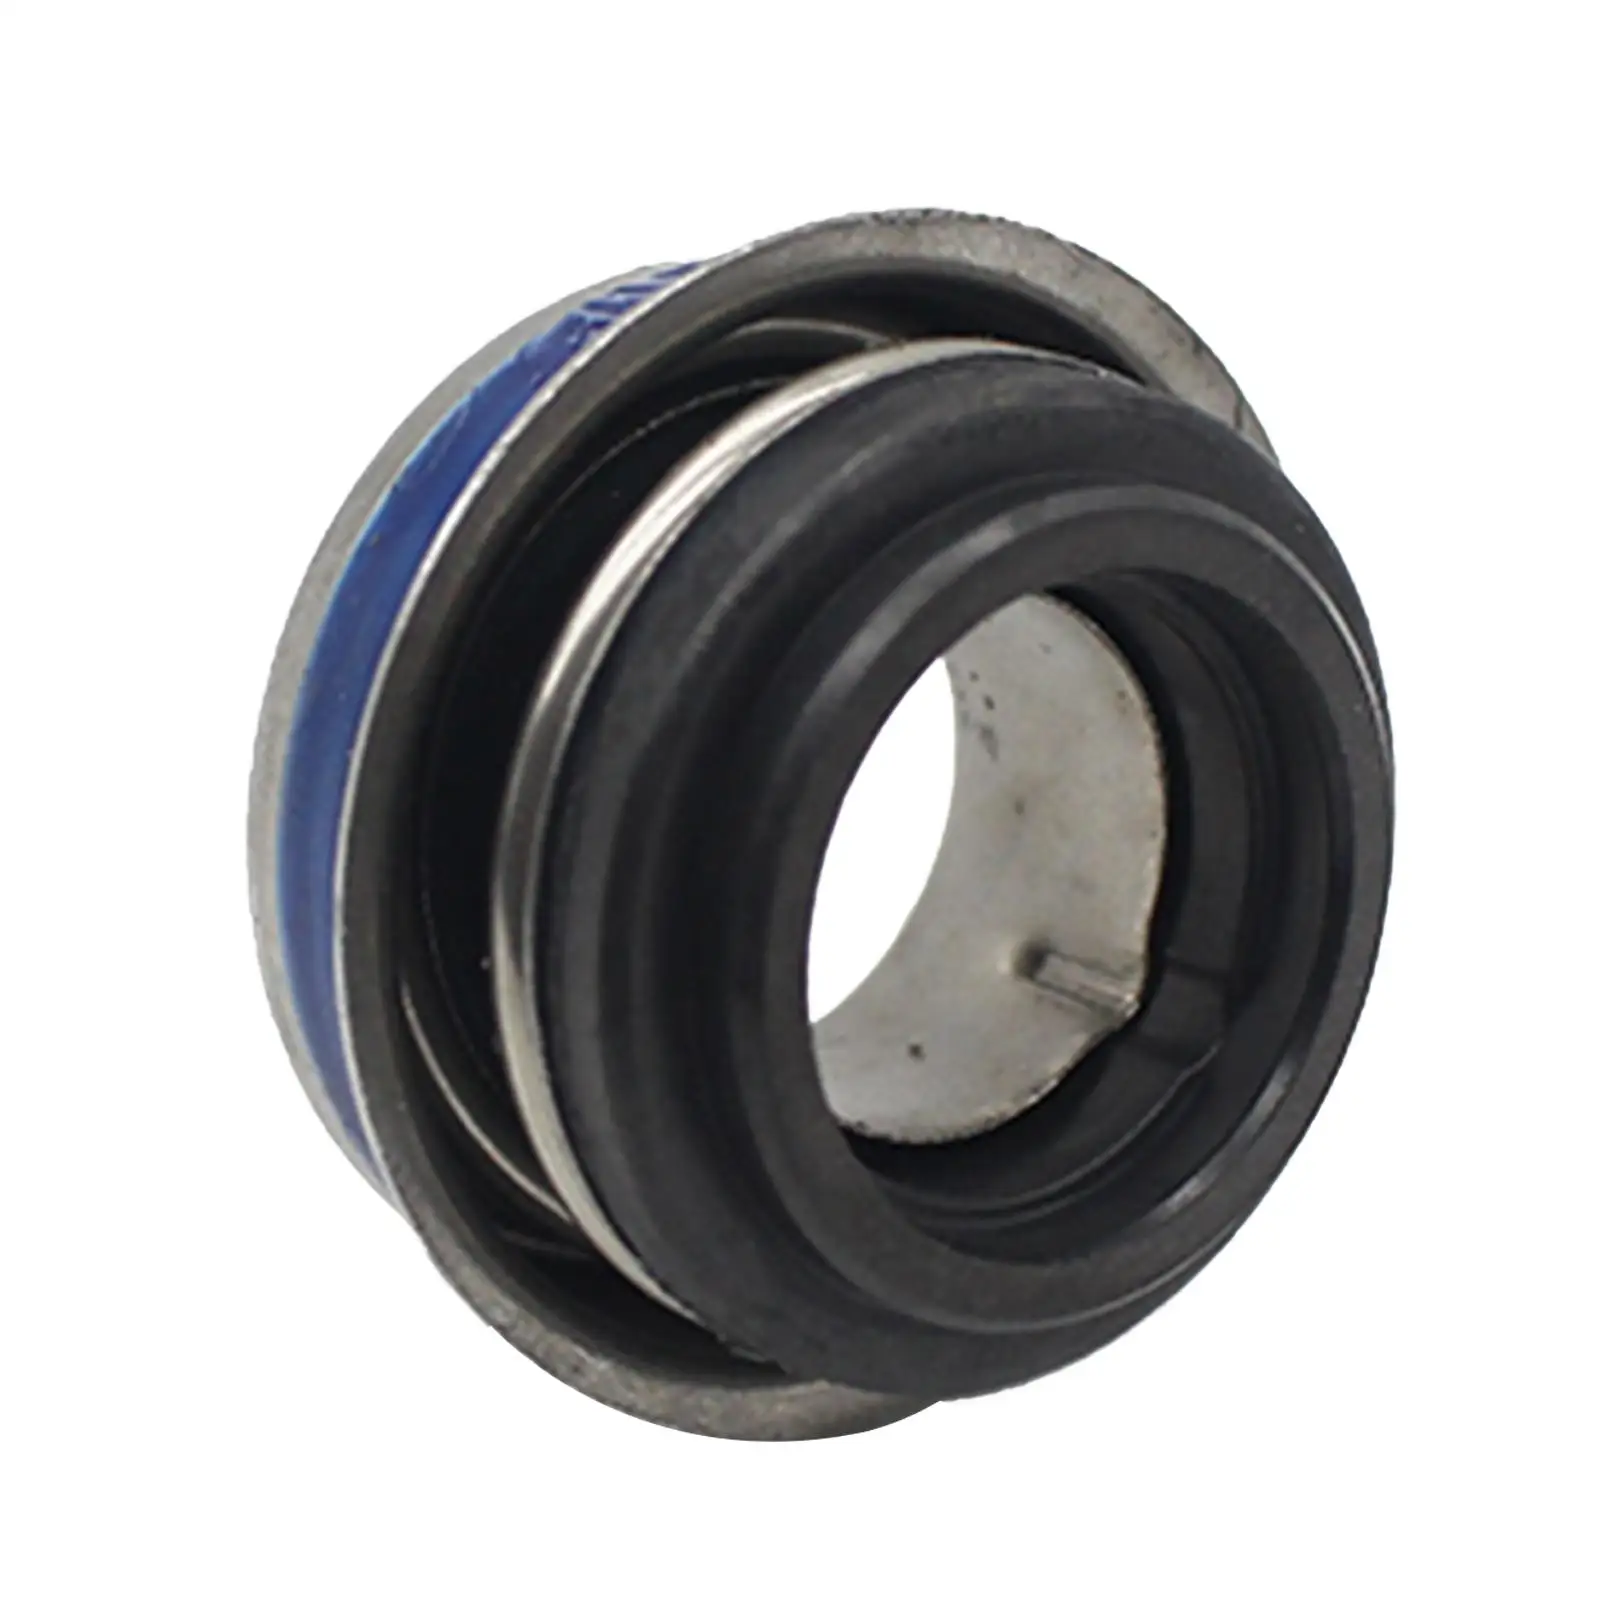 Motorbike Water Pump Oil Seals Fits for TM  XP500 Yy-Yl-Zs 2009-2010 Replaces Professional Durable Accessories